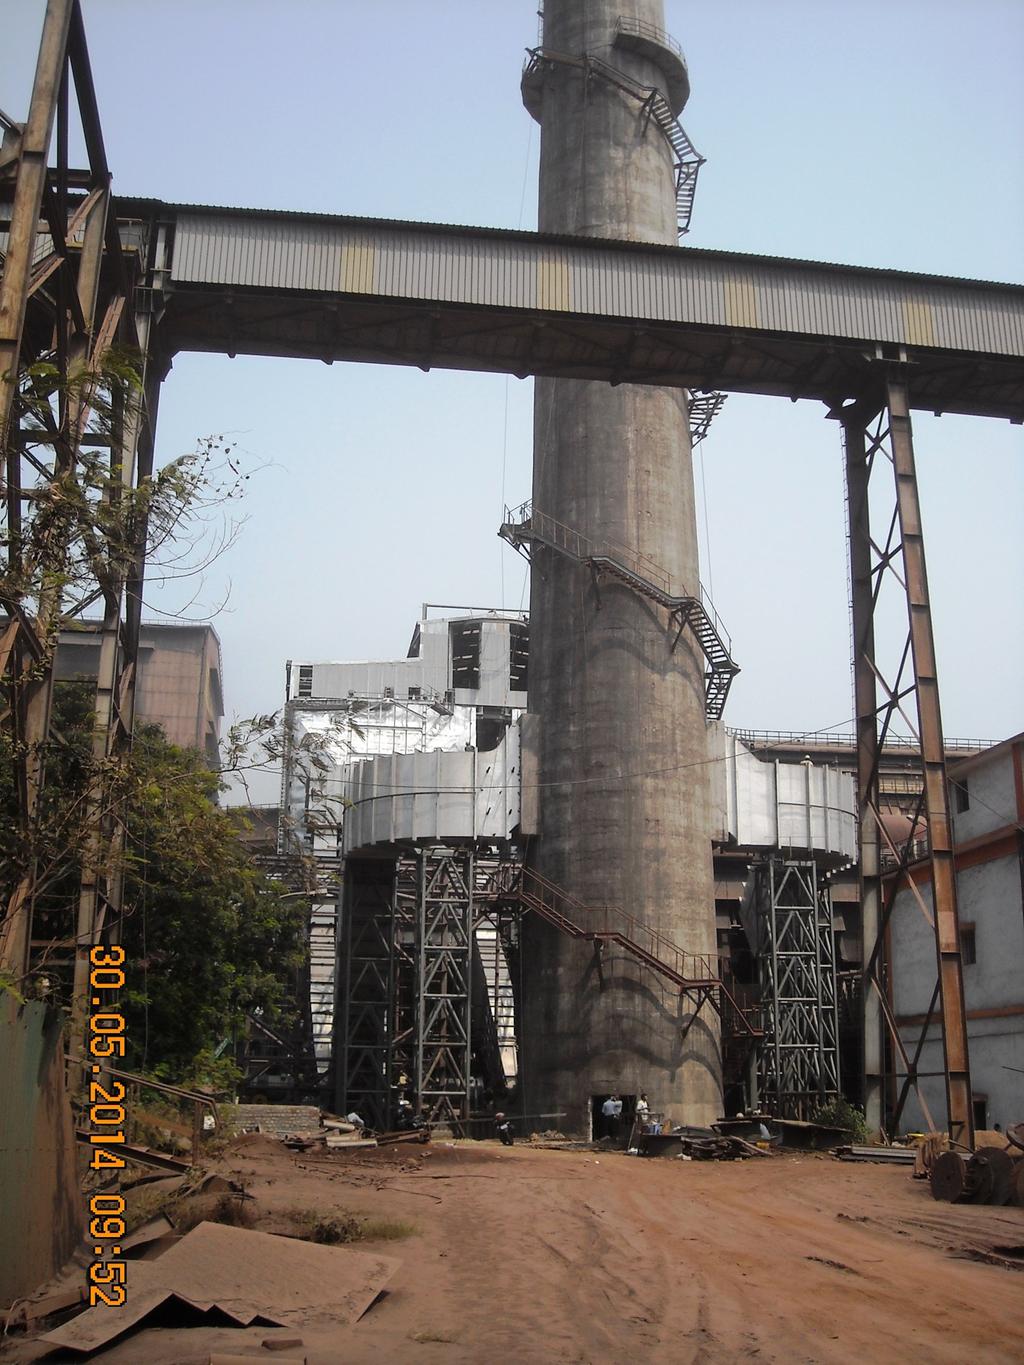 PROVIDE DRY FOGGING SYSTEM IN CRUSHING & SCREENING PLANT, MATERIAL TRANSFER POINTS ETC.